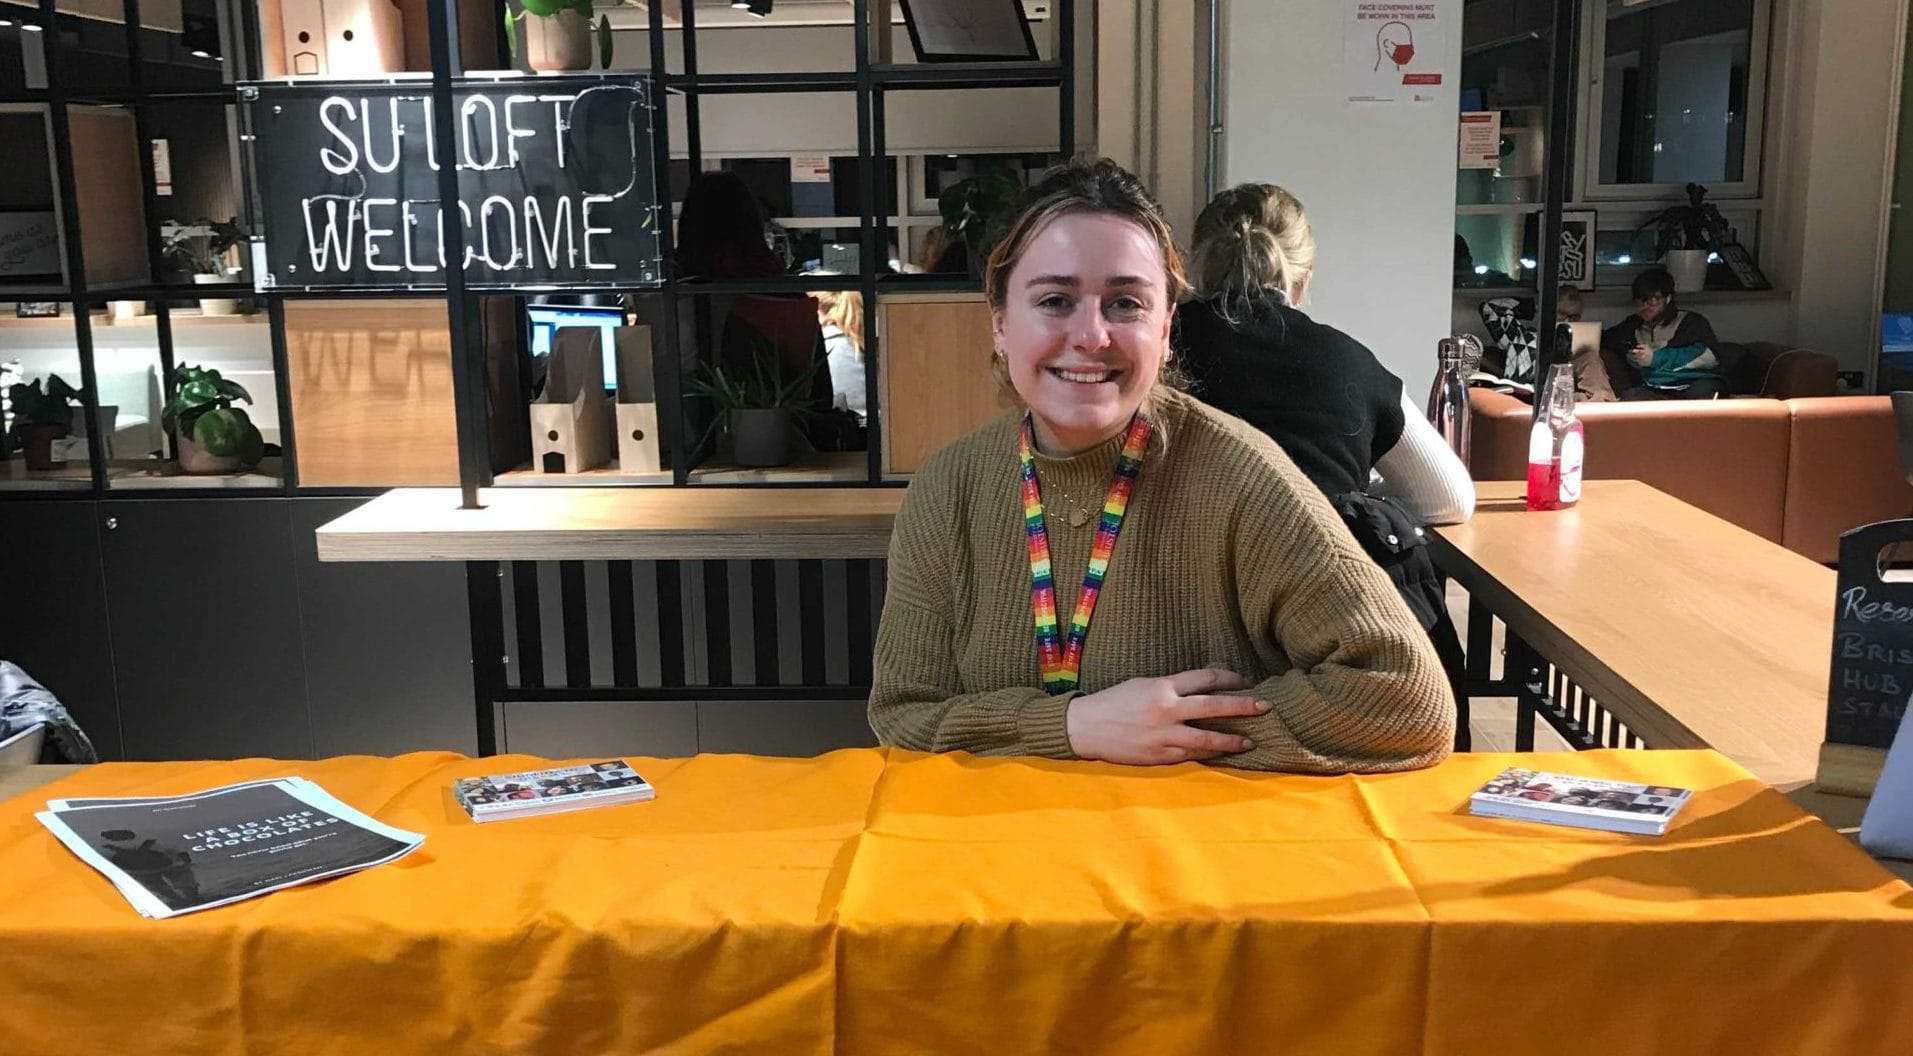 Bristol Hub Programme Manager, Elle, sits down behind a table with an orange tablecloth.